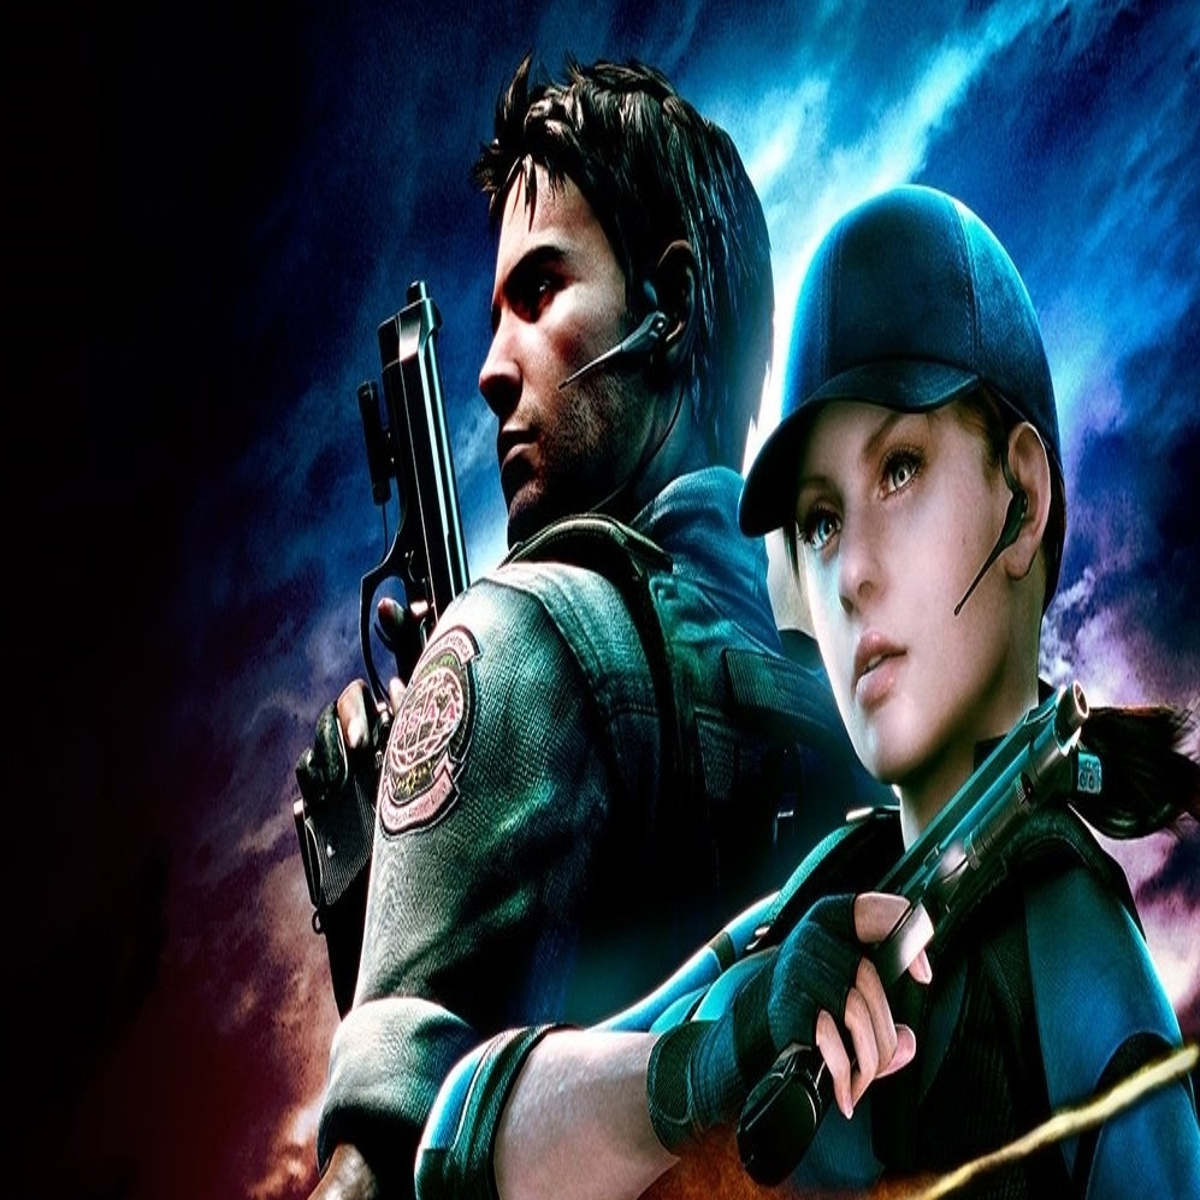 Resident Evil 5 and 6 coming to Nintendo Switch - Polygon